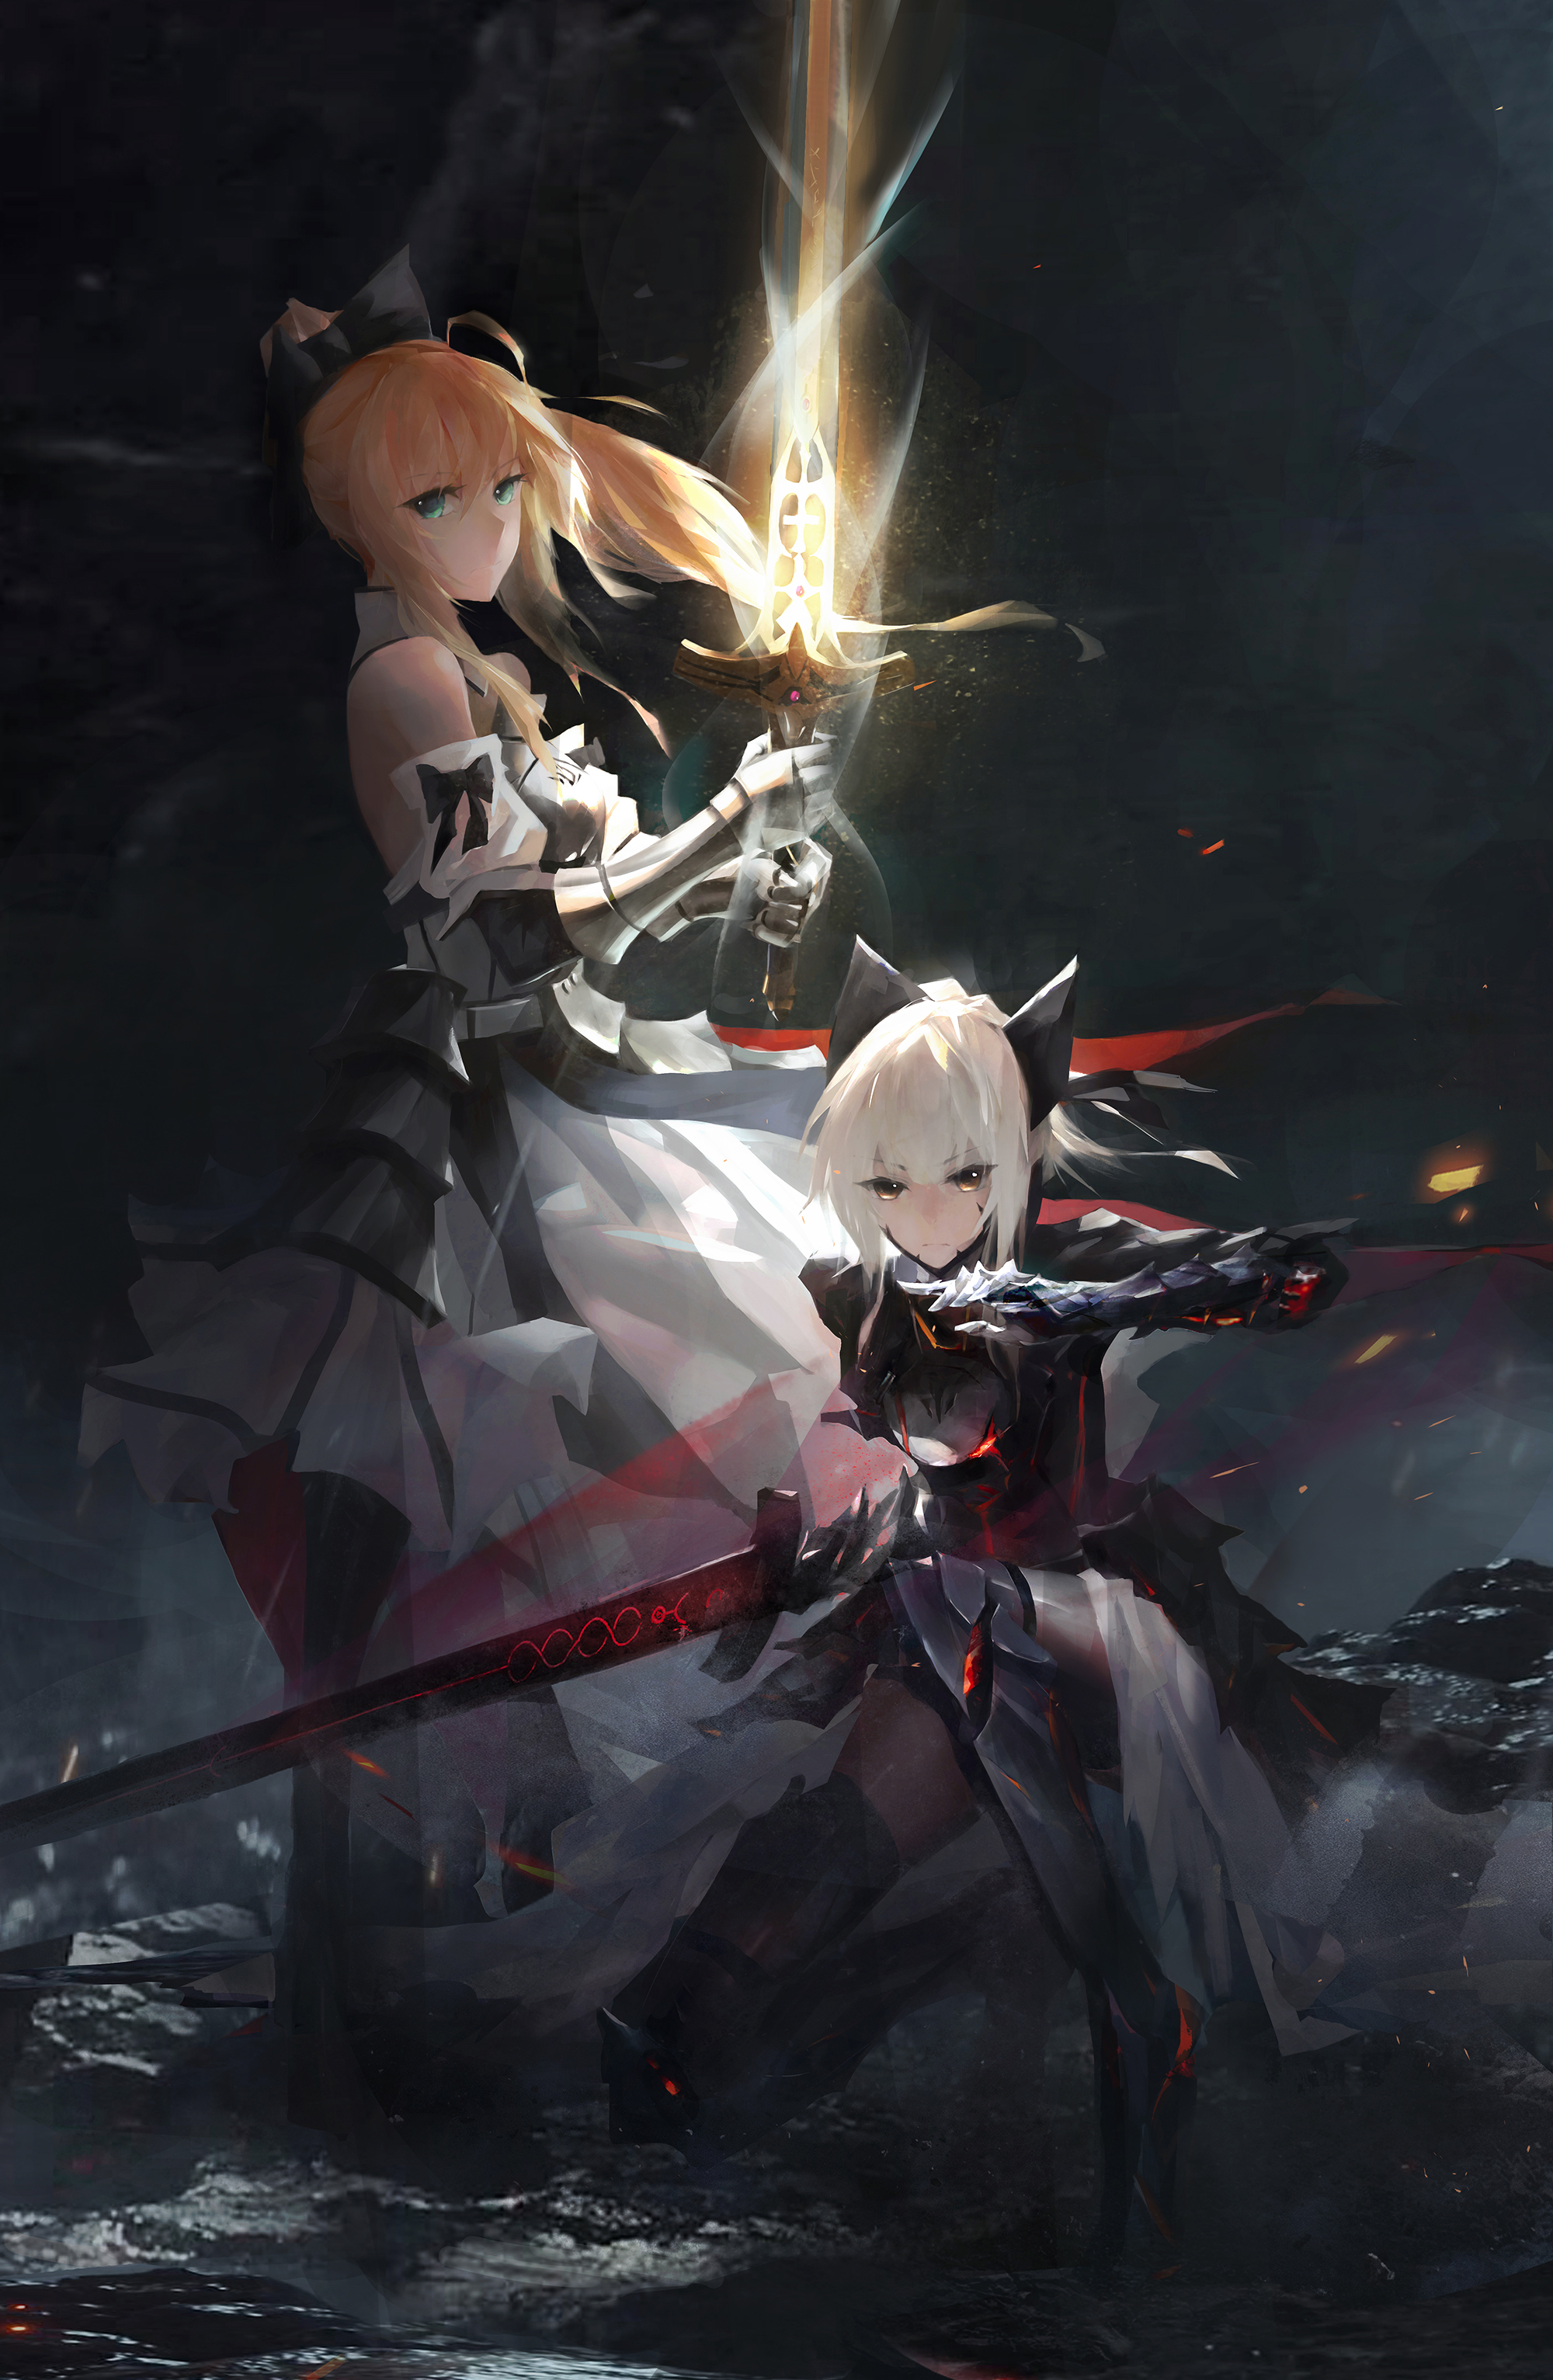 Anime 2000x3065 cell (artist) anime girls Fate series Artoria Pendragon Saber Alter Saber Lily dress armor sword blonde white hair anime Fate/Unlimited Codes  Fate/Grand Order Fate/Stay Night fate/stay night: heaven's feel